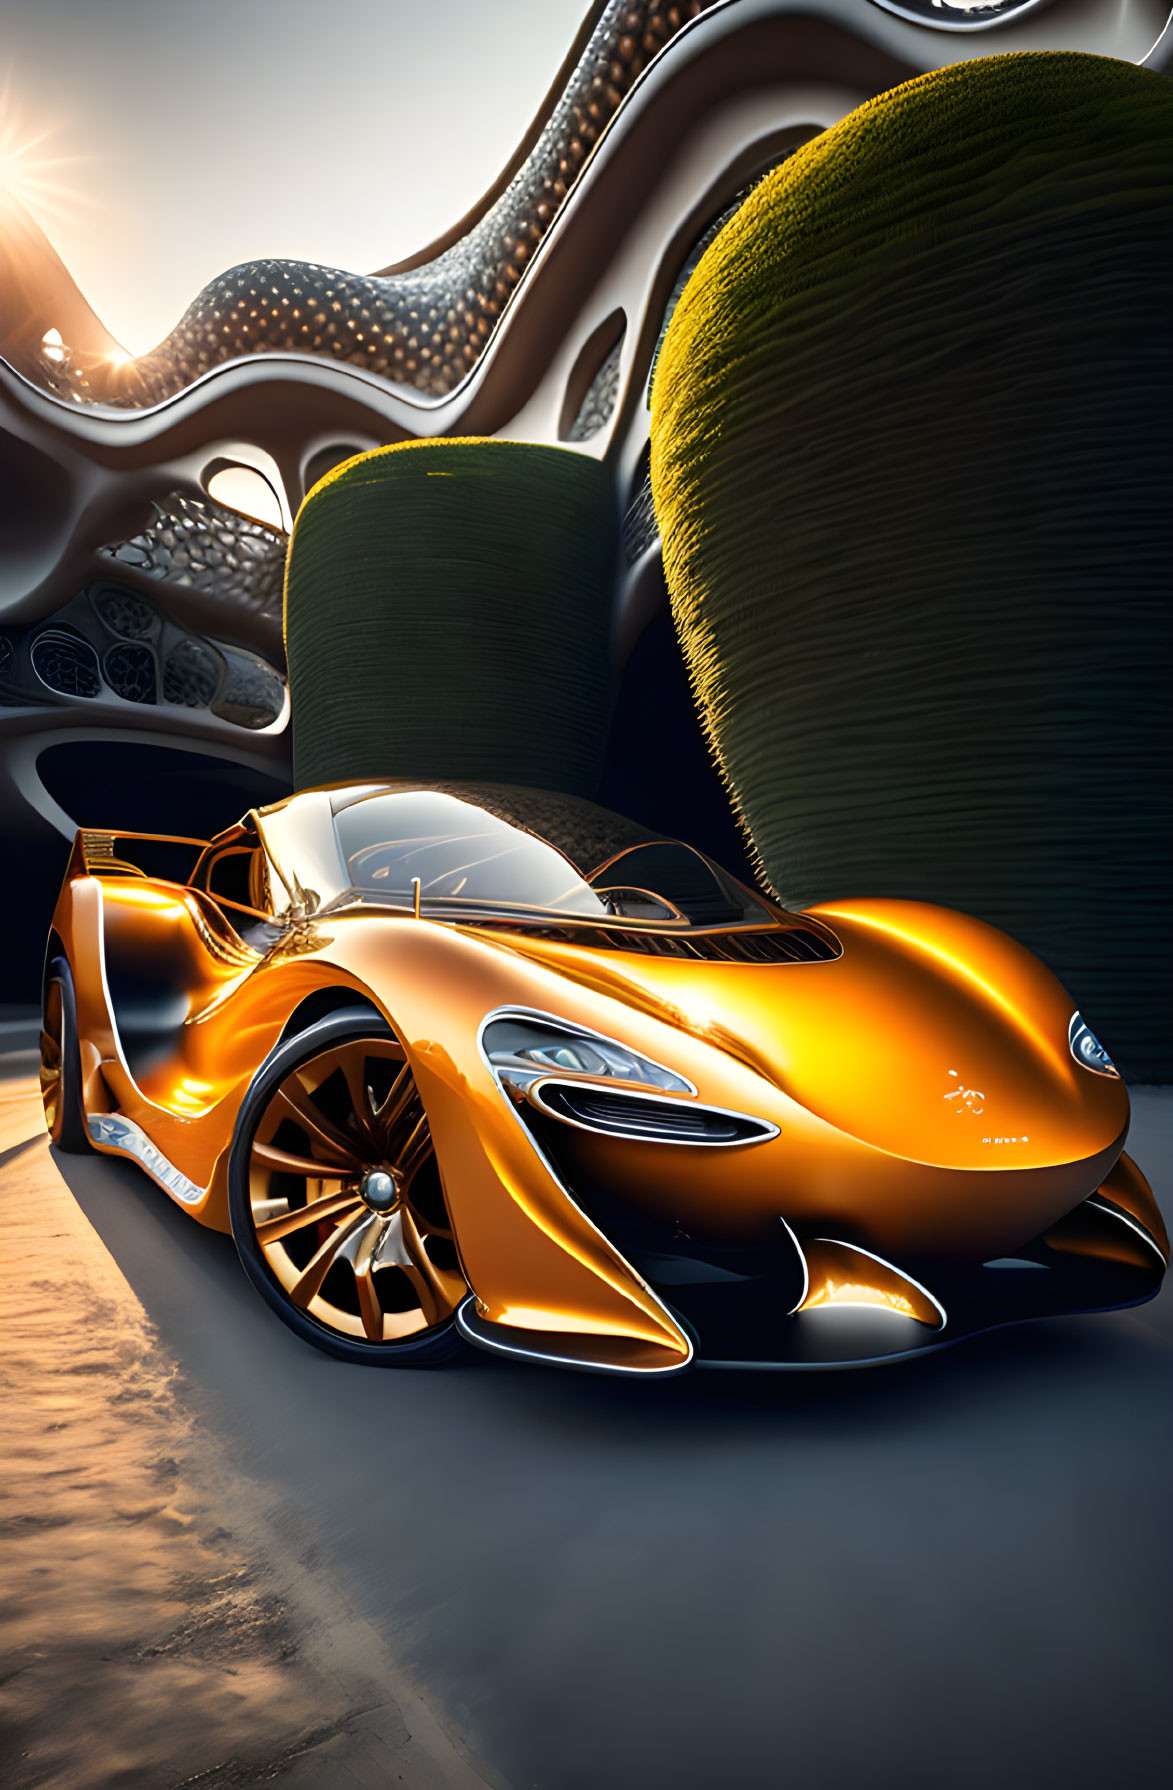 Futuristic orange sports car in front of abstract wave-like structures